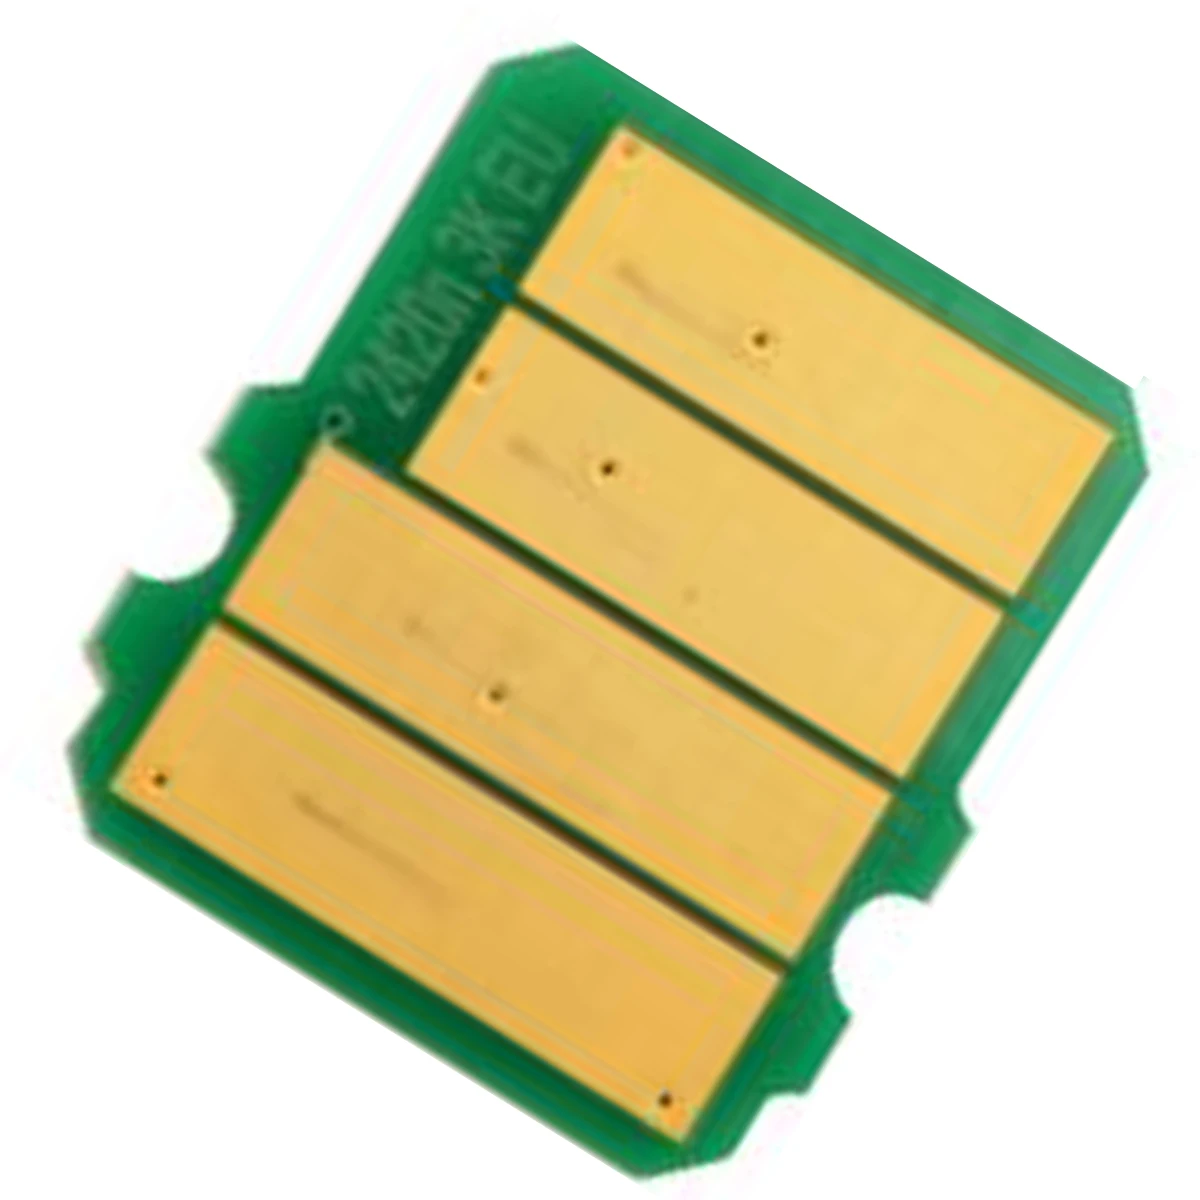 

Toner Chip for Brother MFCL2770DW MFCL2775DW HLL2370XL HL L2310D L2350DW L2357DW L2370DN L2370DW L2370DW XL L2375DW L2370XL MFC